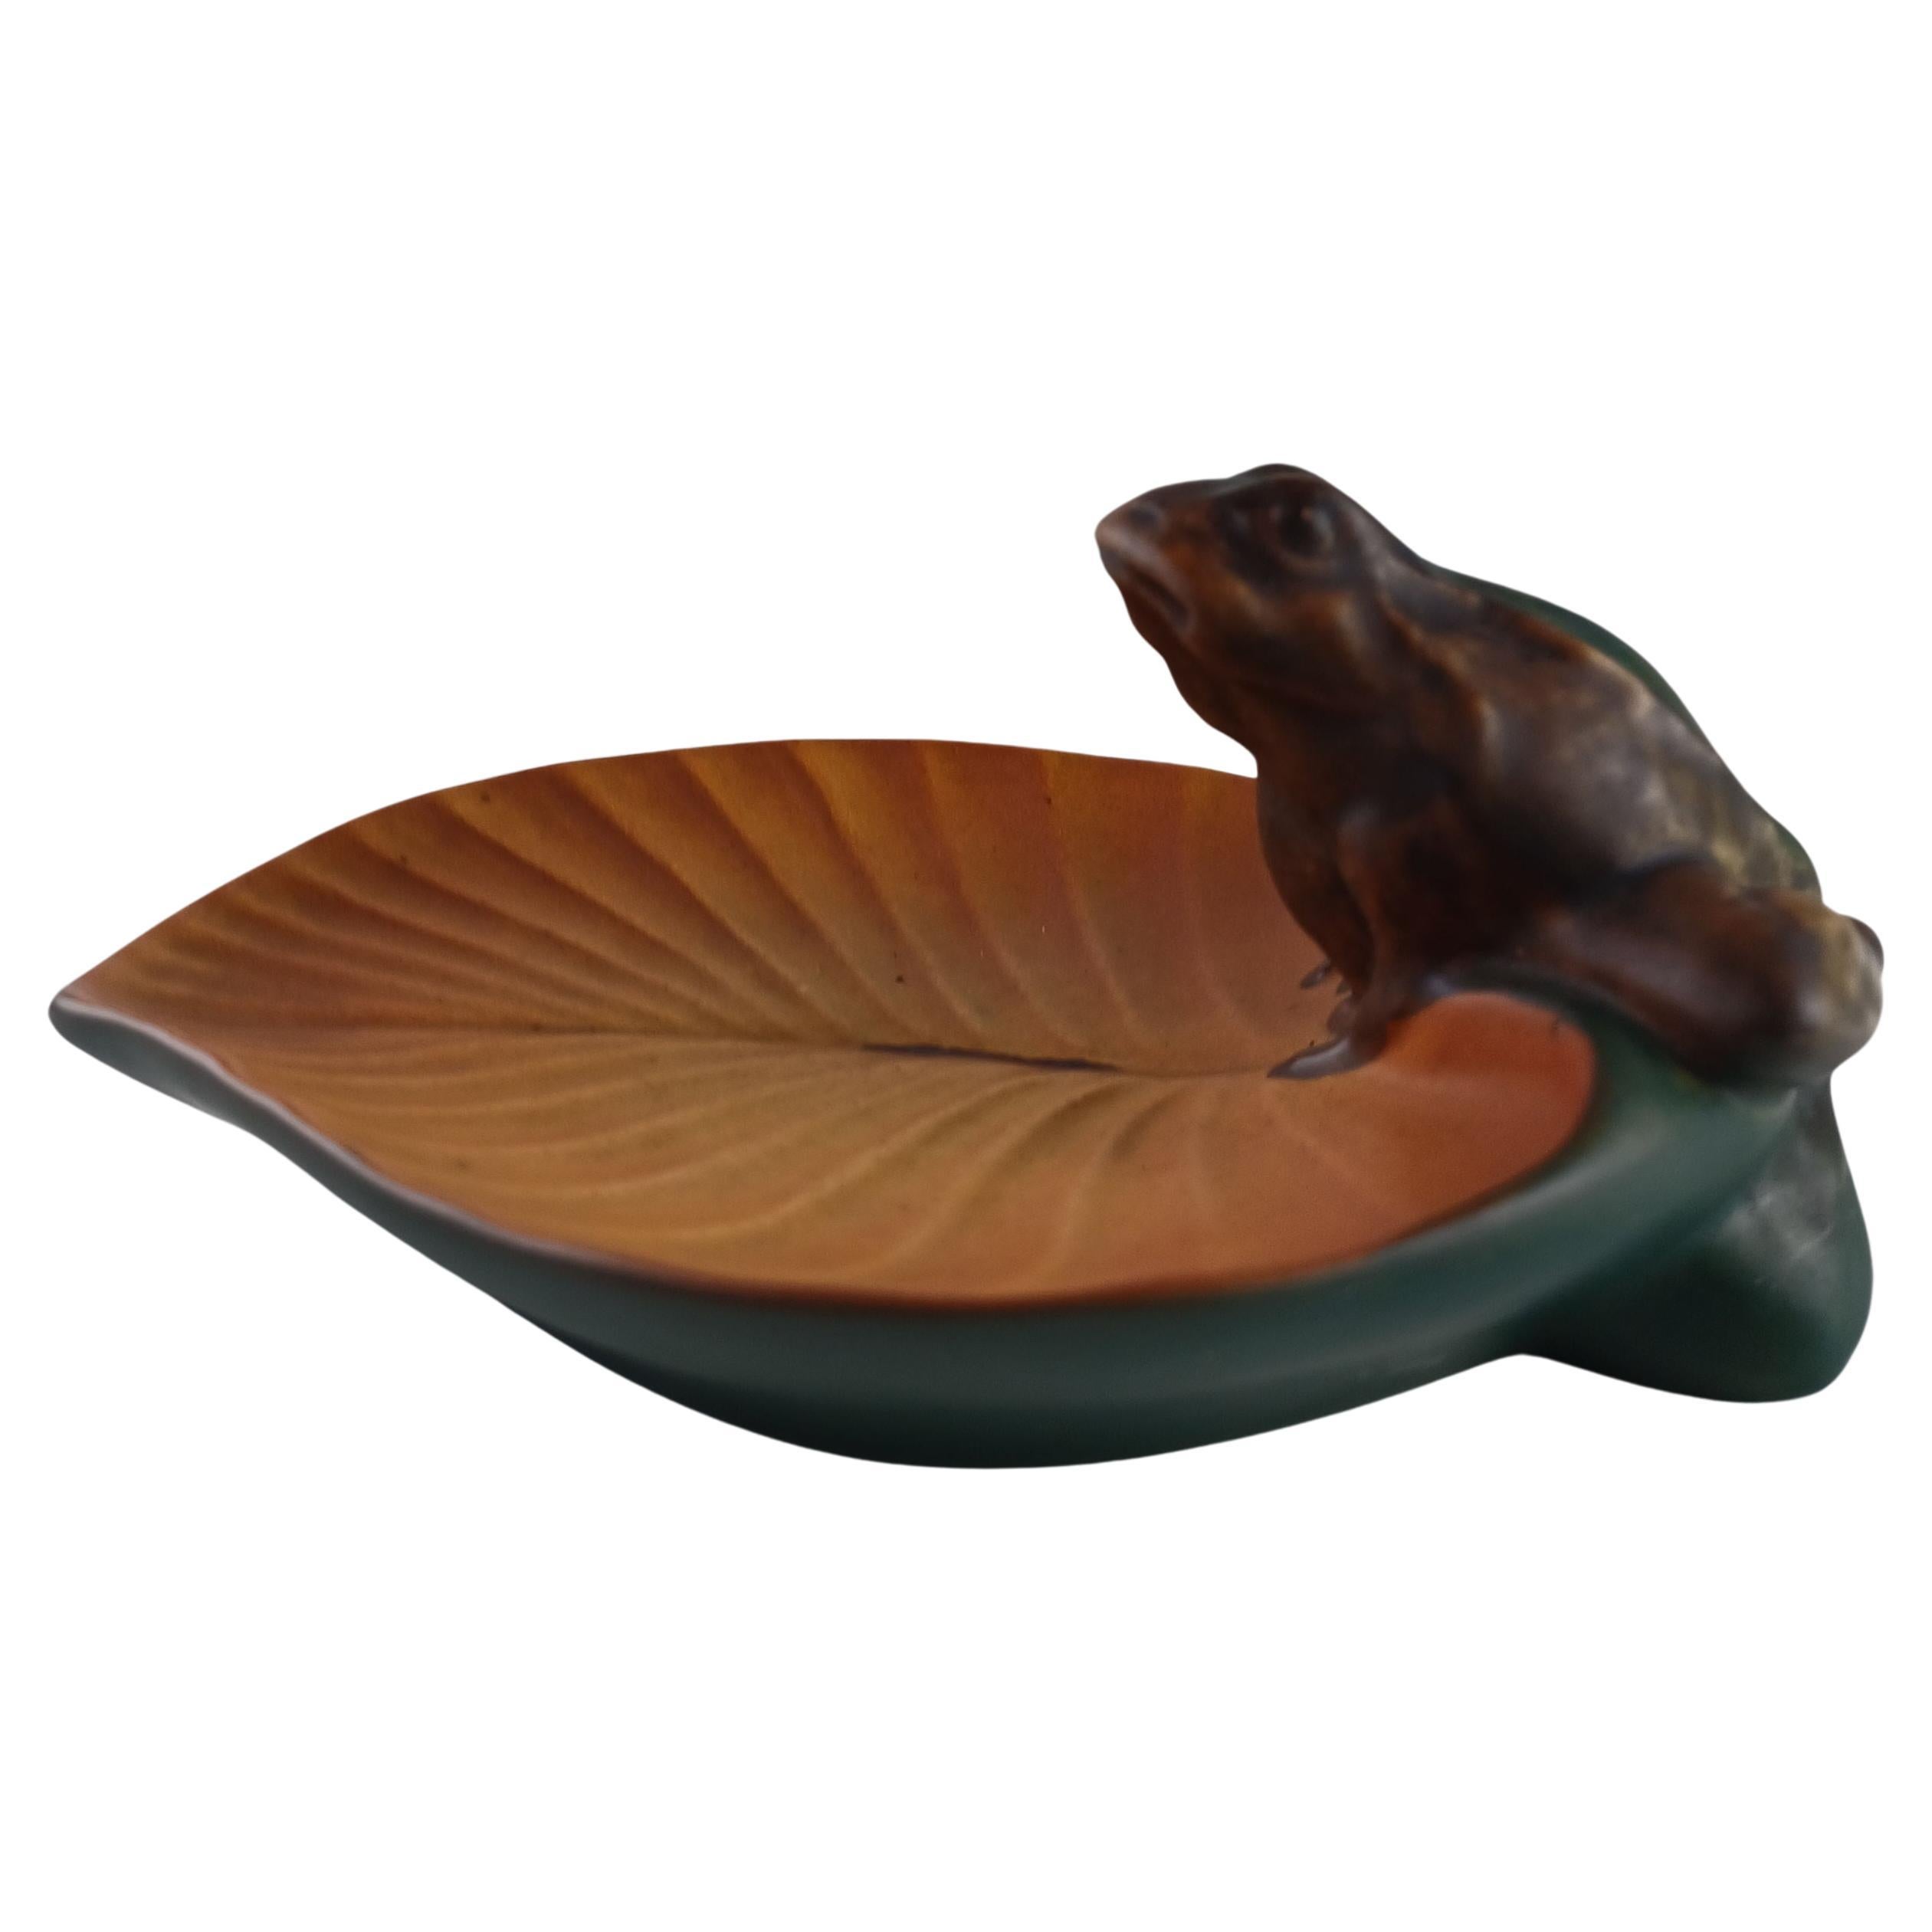 1920's Small Handcrafed Danish Art Nouveau Handcrafted Frog Dish by Ipsens Enke For Sale